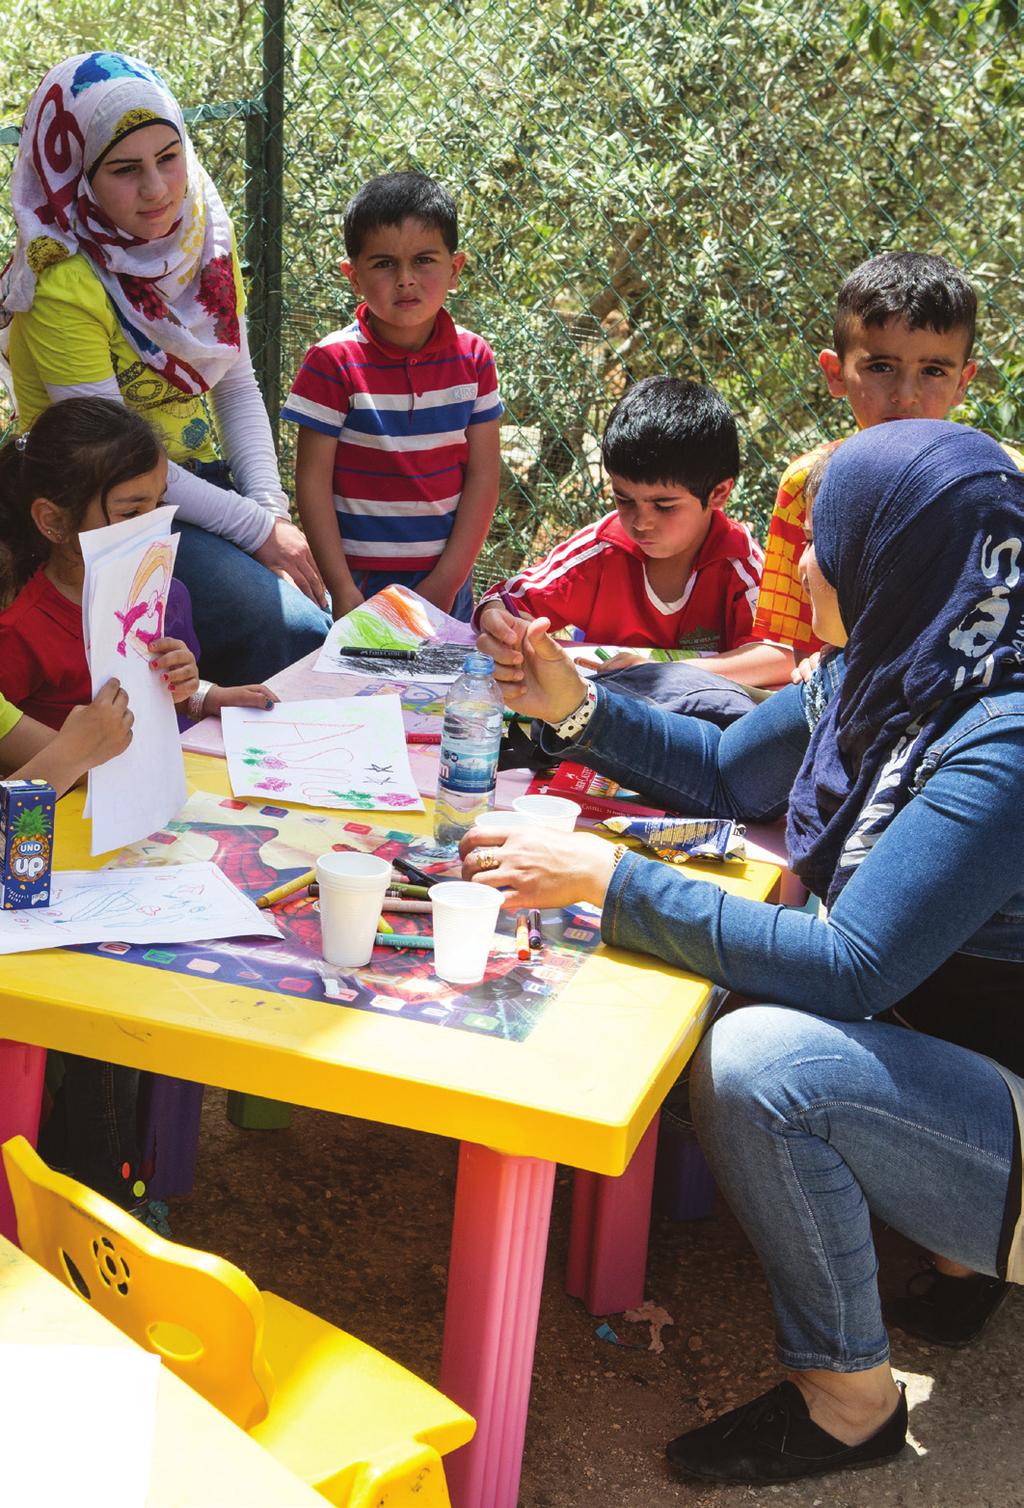 THE IMPACT OF COMMUNITY CENTRES UNHCR / J. Matas catalyst for initiatives and innovations by refugees, such as the creation of youth committees or the provision of informal education.